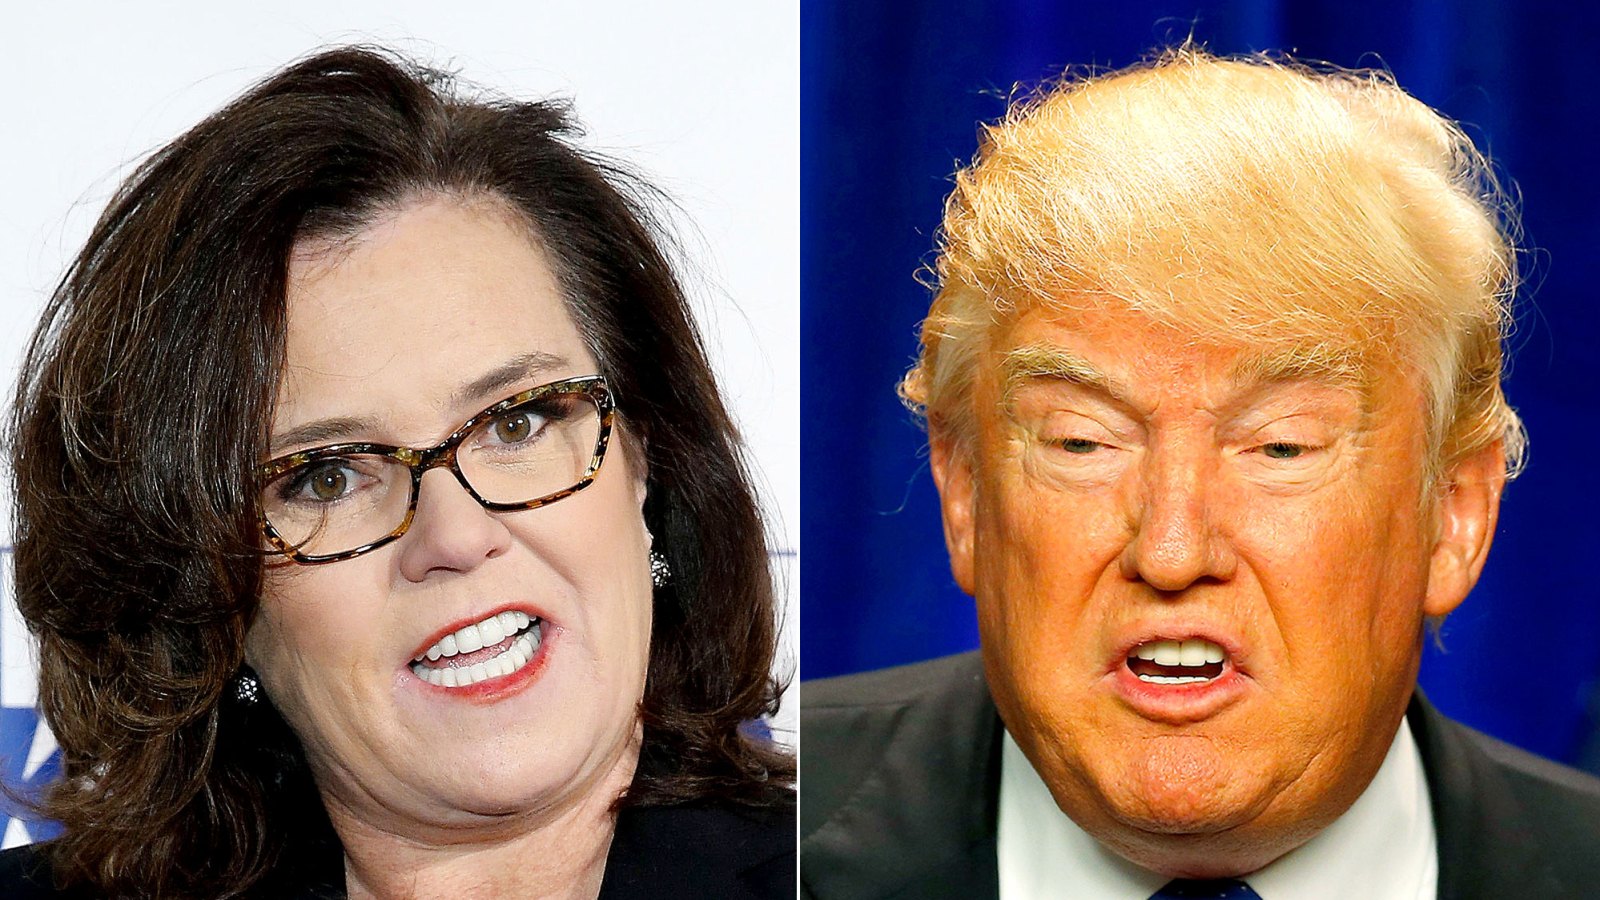 Rosie O'Donnell, Donald Trump